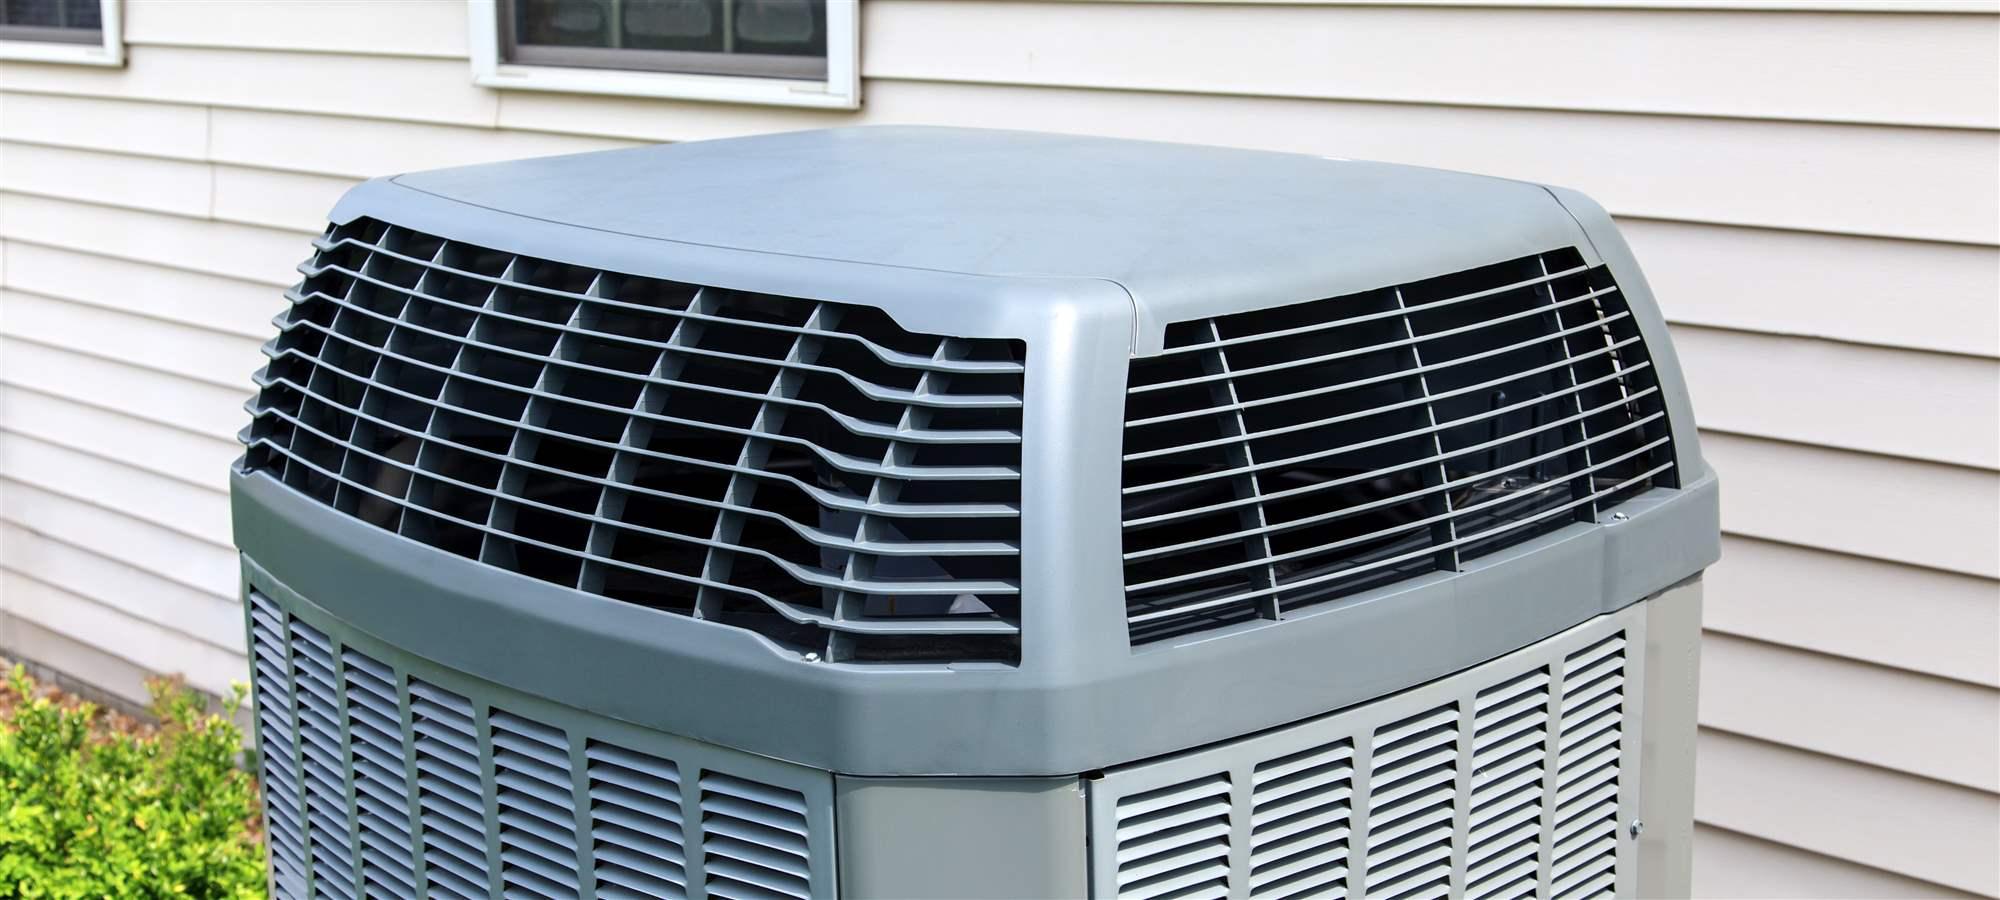 A heat pump outside a residential home